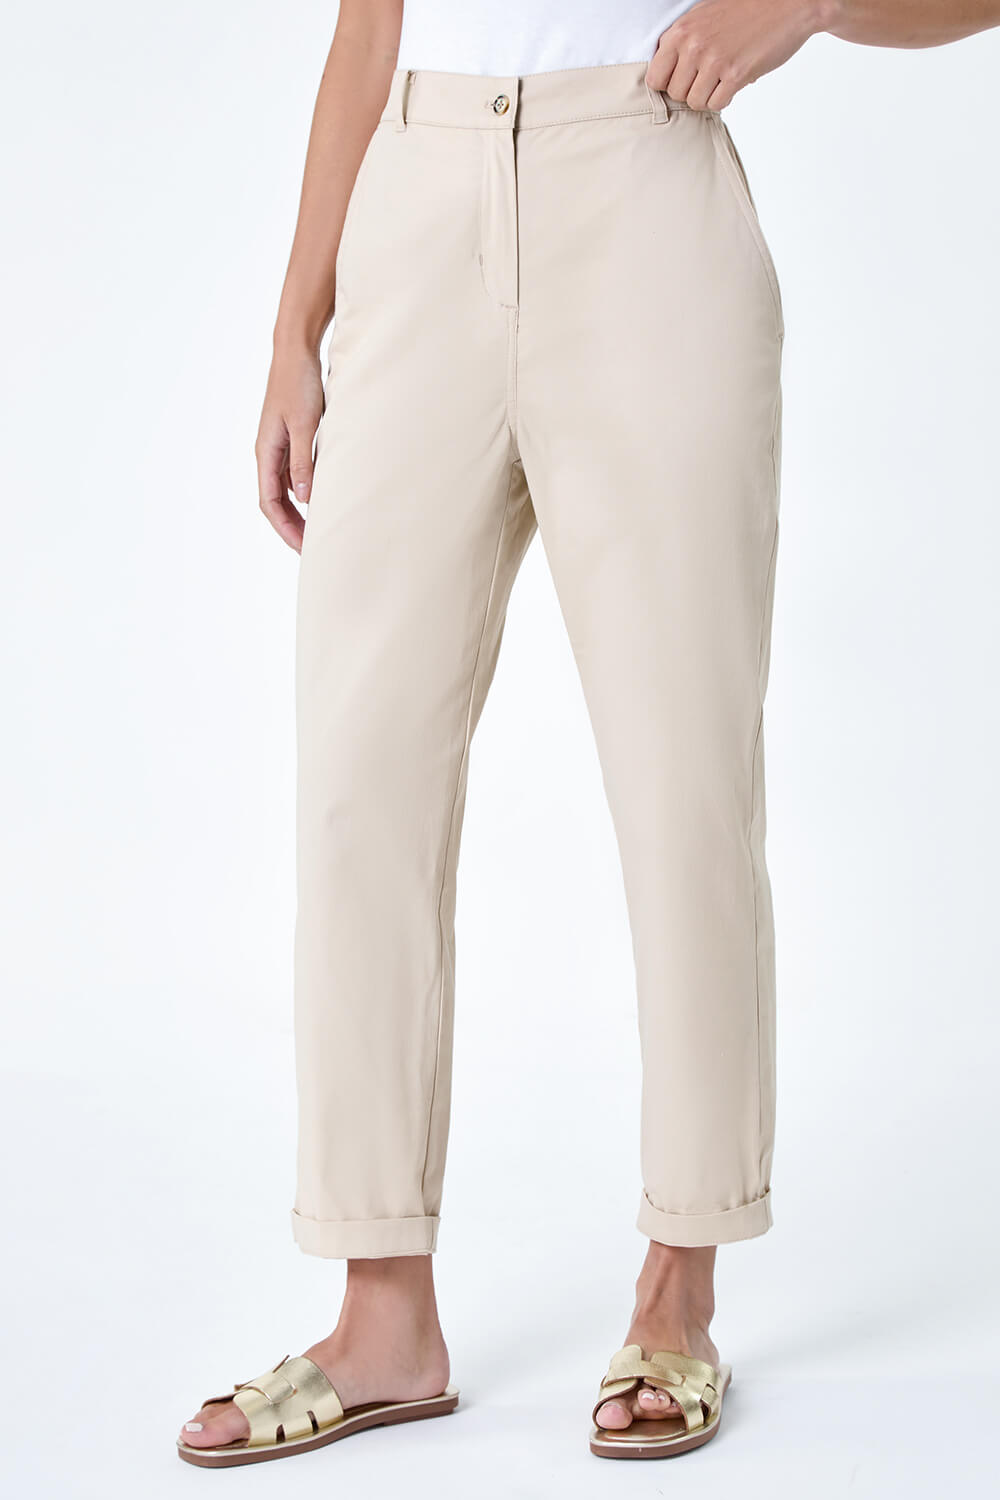 Stone Petite Cotton Blend Stretch Chino Trousers, Image 4 of 5